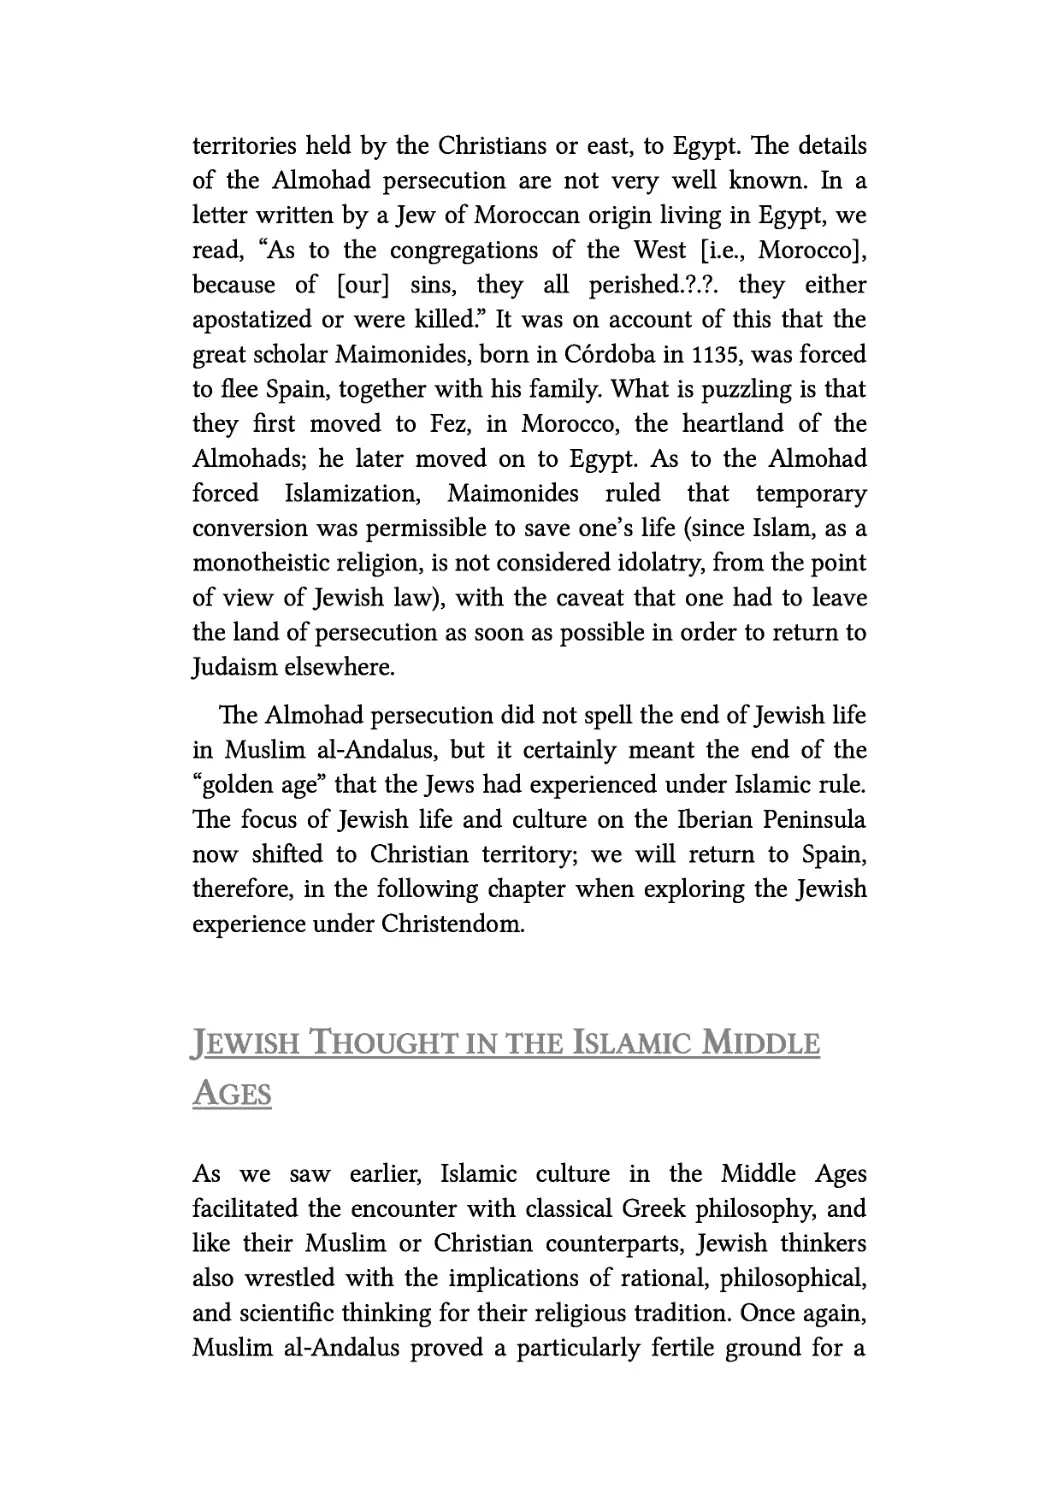 Jewish Thought in the Islamic Middle Ages